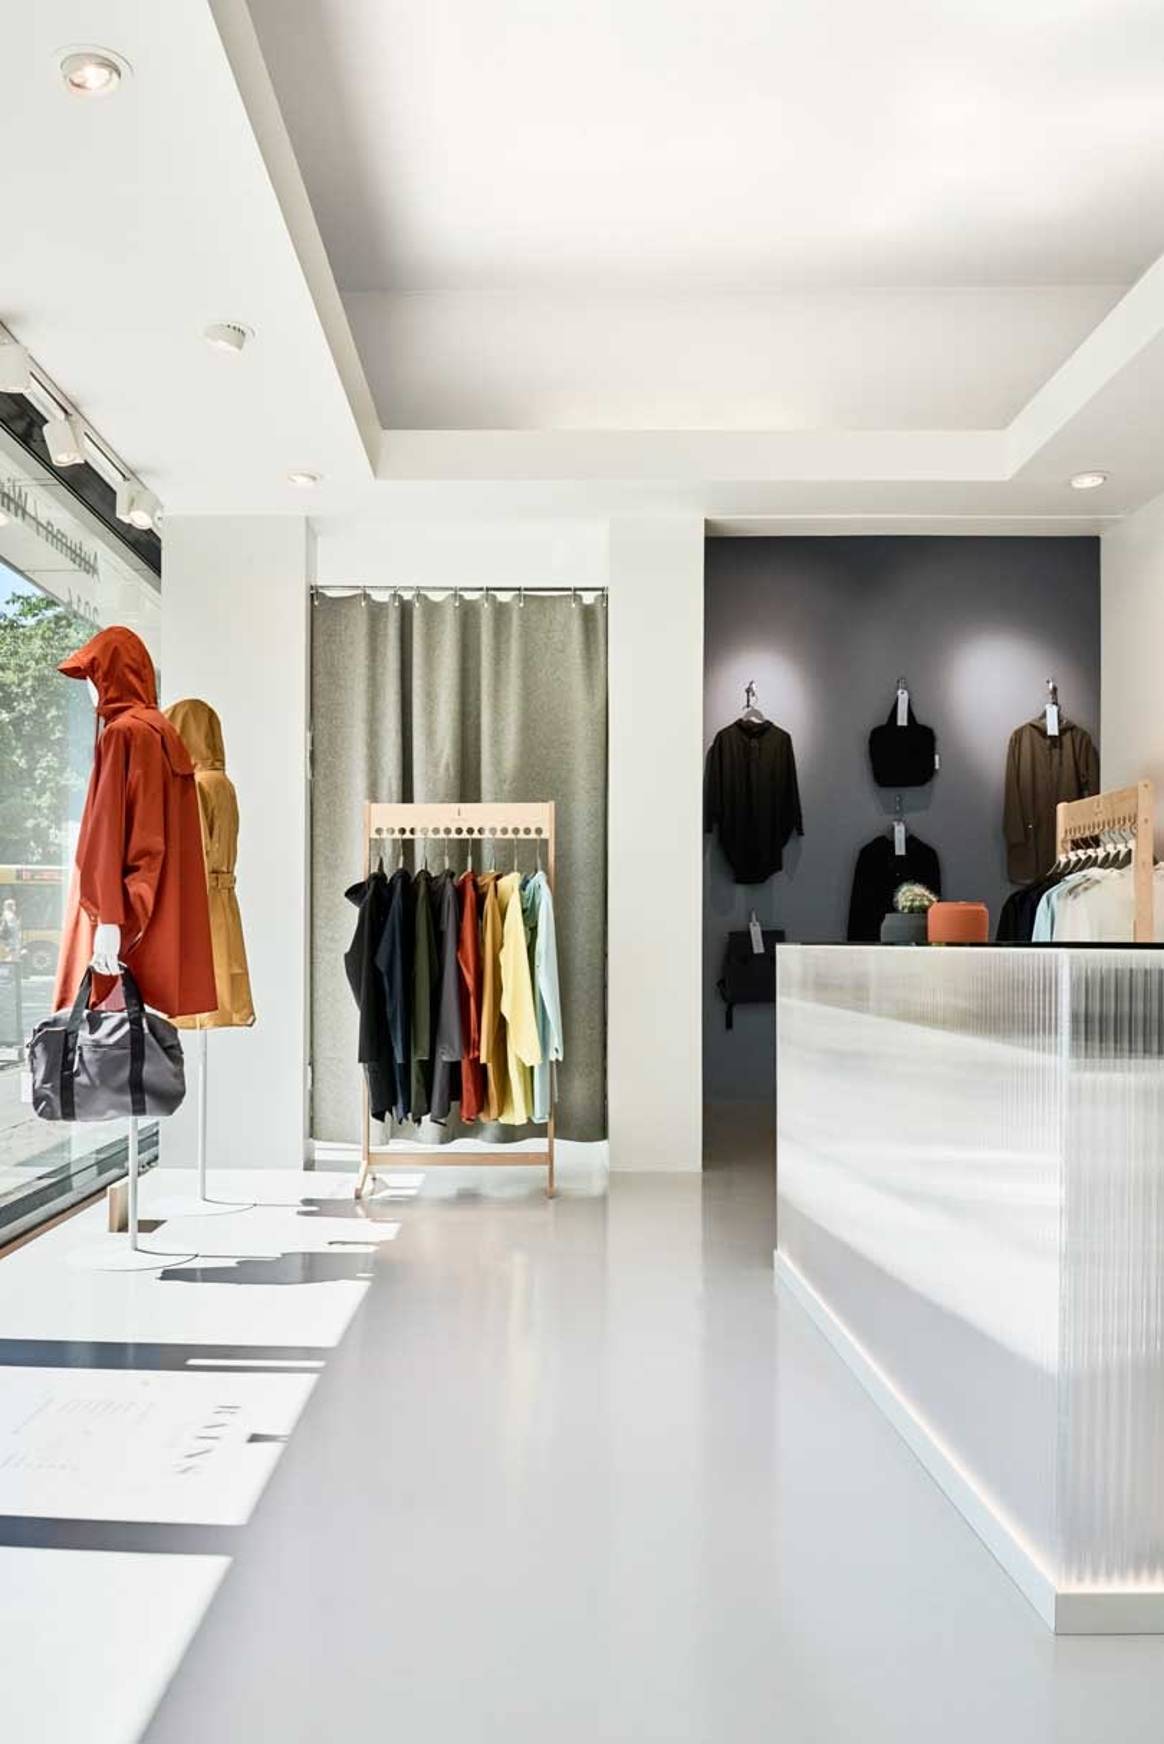 Rains opent concept store in Amsterdam